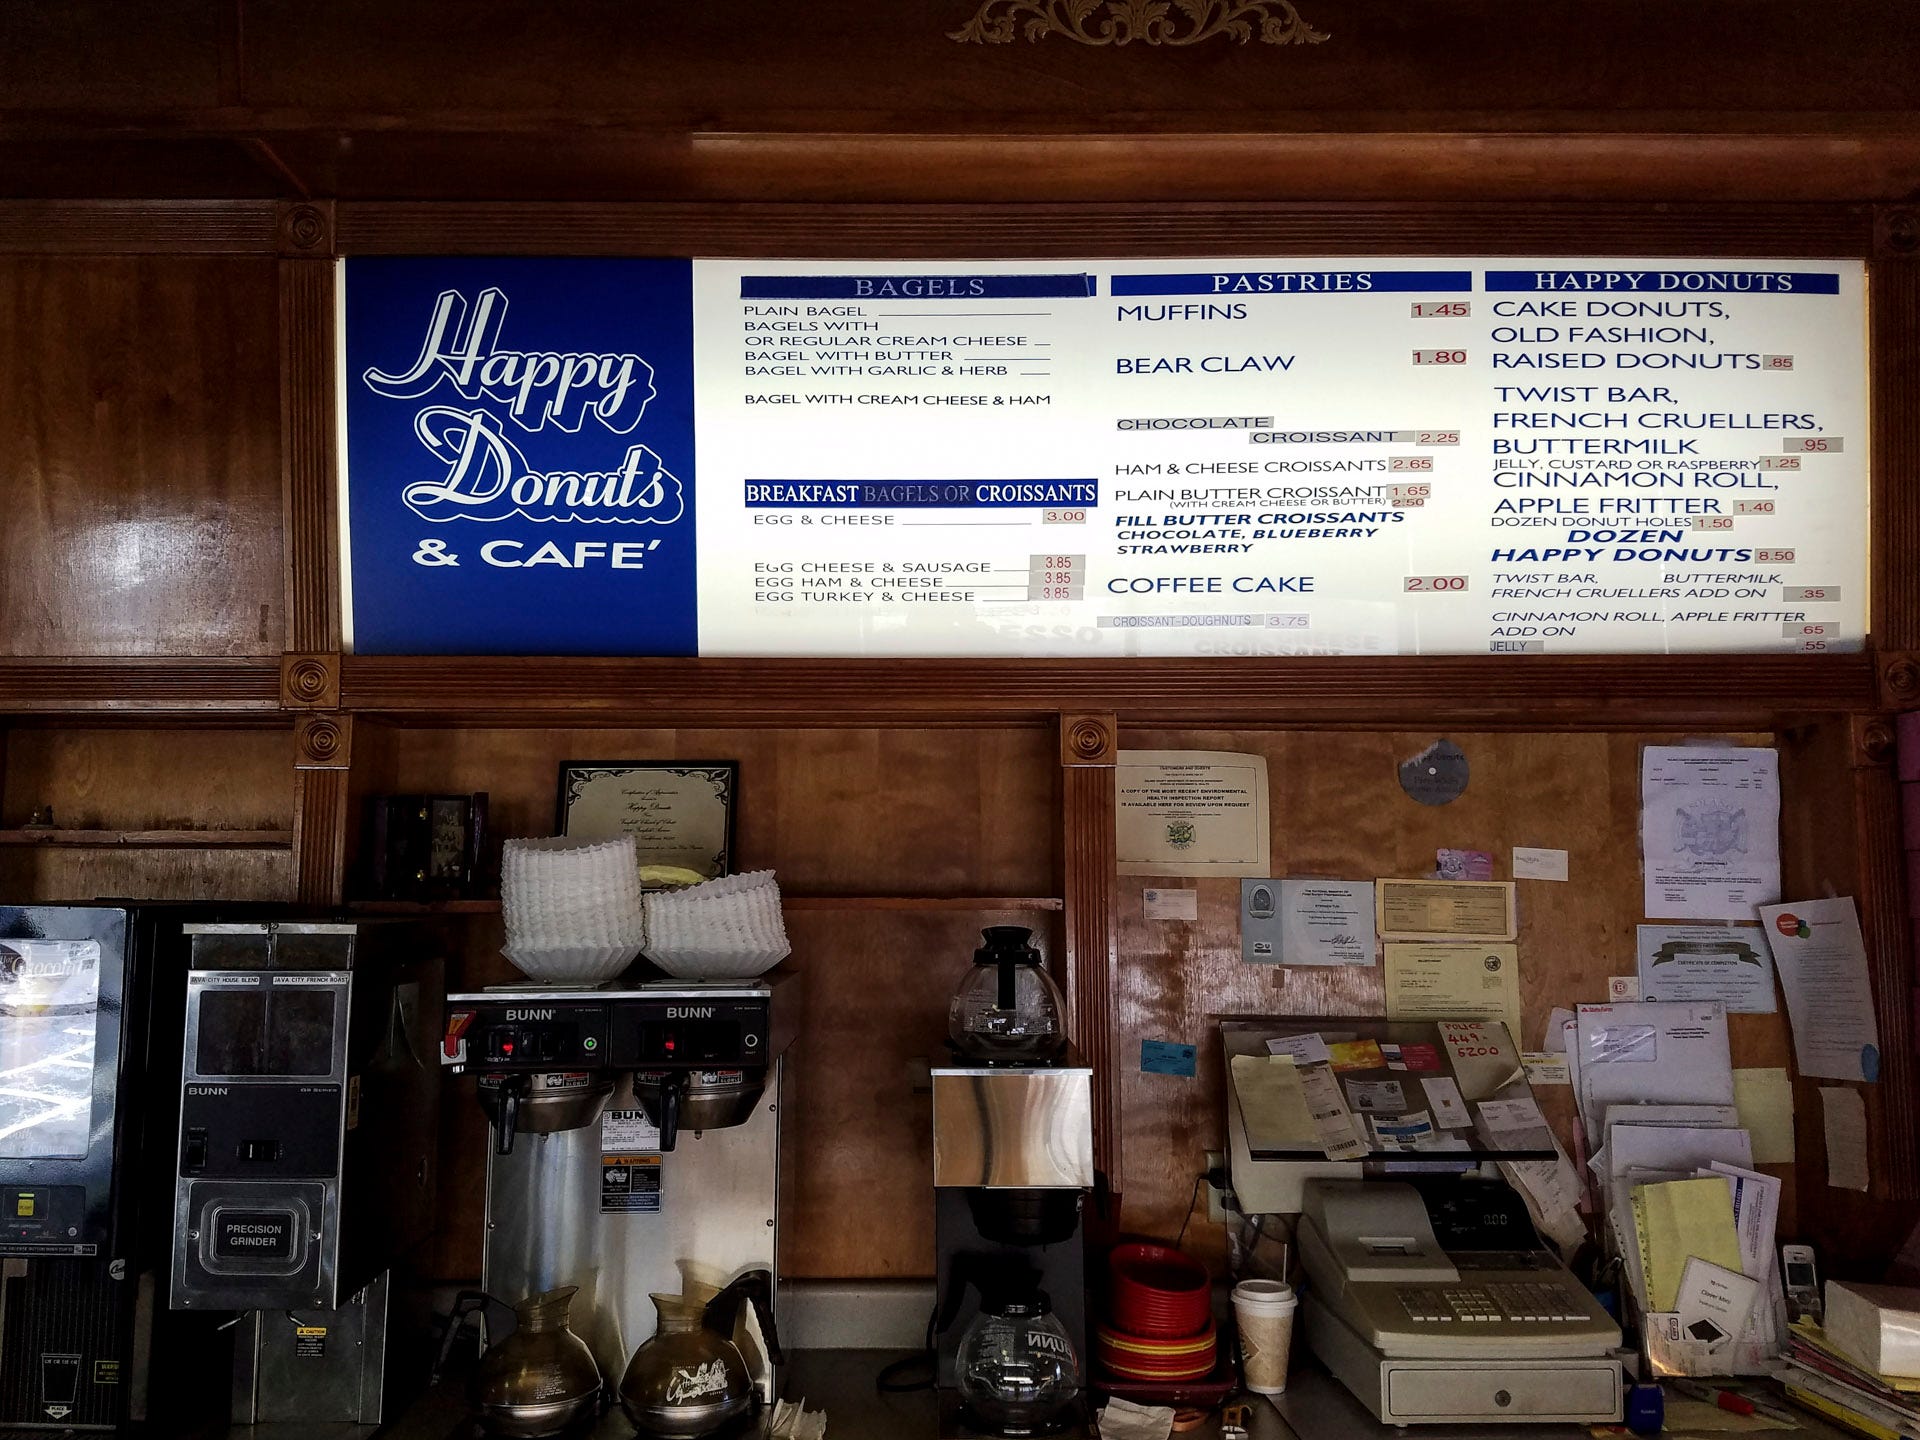 Photo of the back wall of "Happy Donuts & Cafe". On the left side of counter sit three industrial-sized Bunn coffee makers, a coffee grinder, and a cream dispenser. On the right side is a cash register, various legal certificates affixed to the wall, and various and sundry papers, envelopes and detritus. The back wall is finished in stained wood, with shelves and trim pieces that have seen better days. Above is the backlit "Happy Donuts Cafe", blue lettering and graphics upon a white background. Categories are "BAGELS", "BREAKFAST BAGELS OR CROISSANTS", "PASTRIES", and "HAPPY DONUTS" with items listed with each category. Prices are printed on white paper (in red lettering) and then affixed beside each item. Lettering seems haphazard.